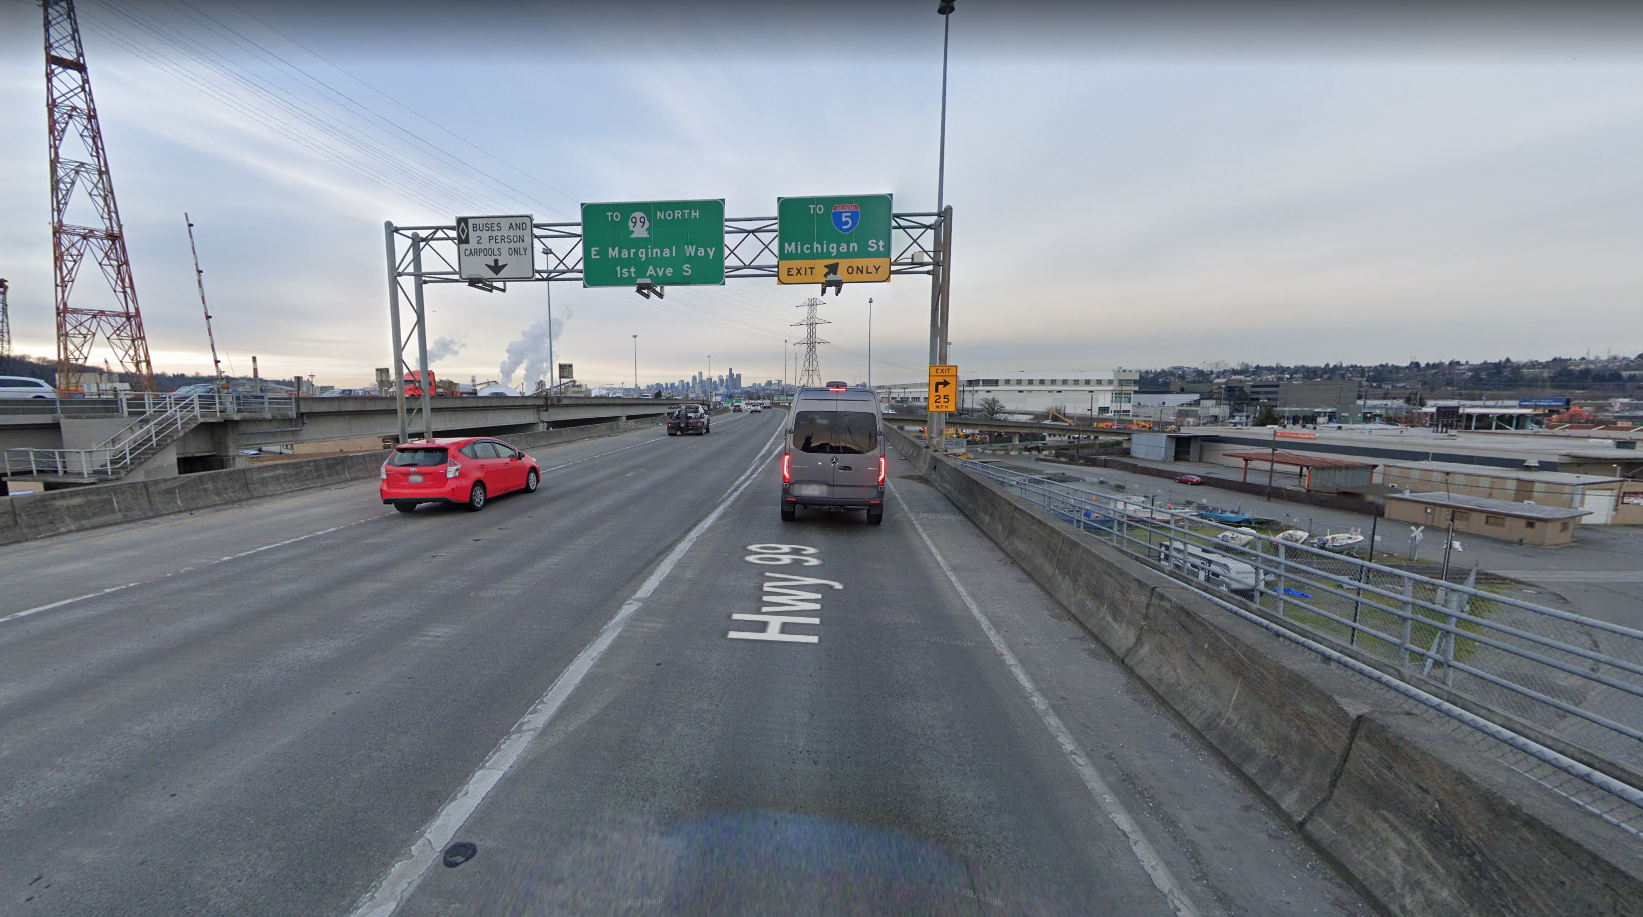 News: Two-car crash, fire reported on 1st Ave S Bridge near west Seattle